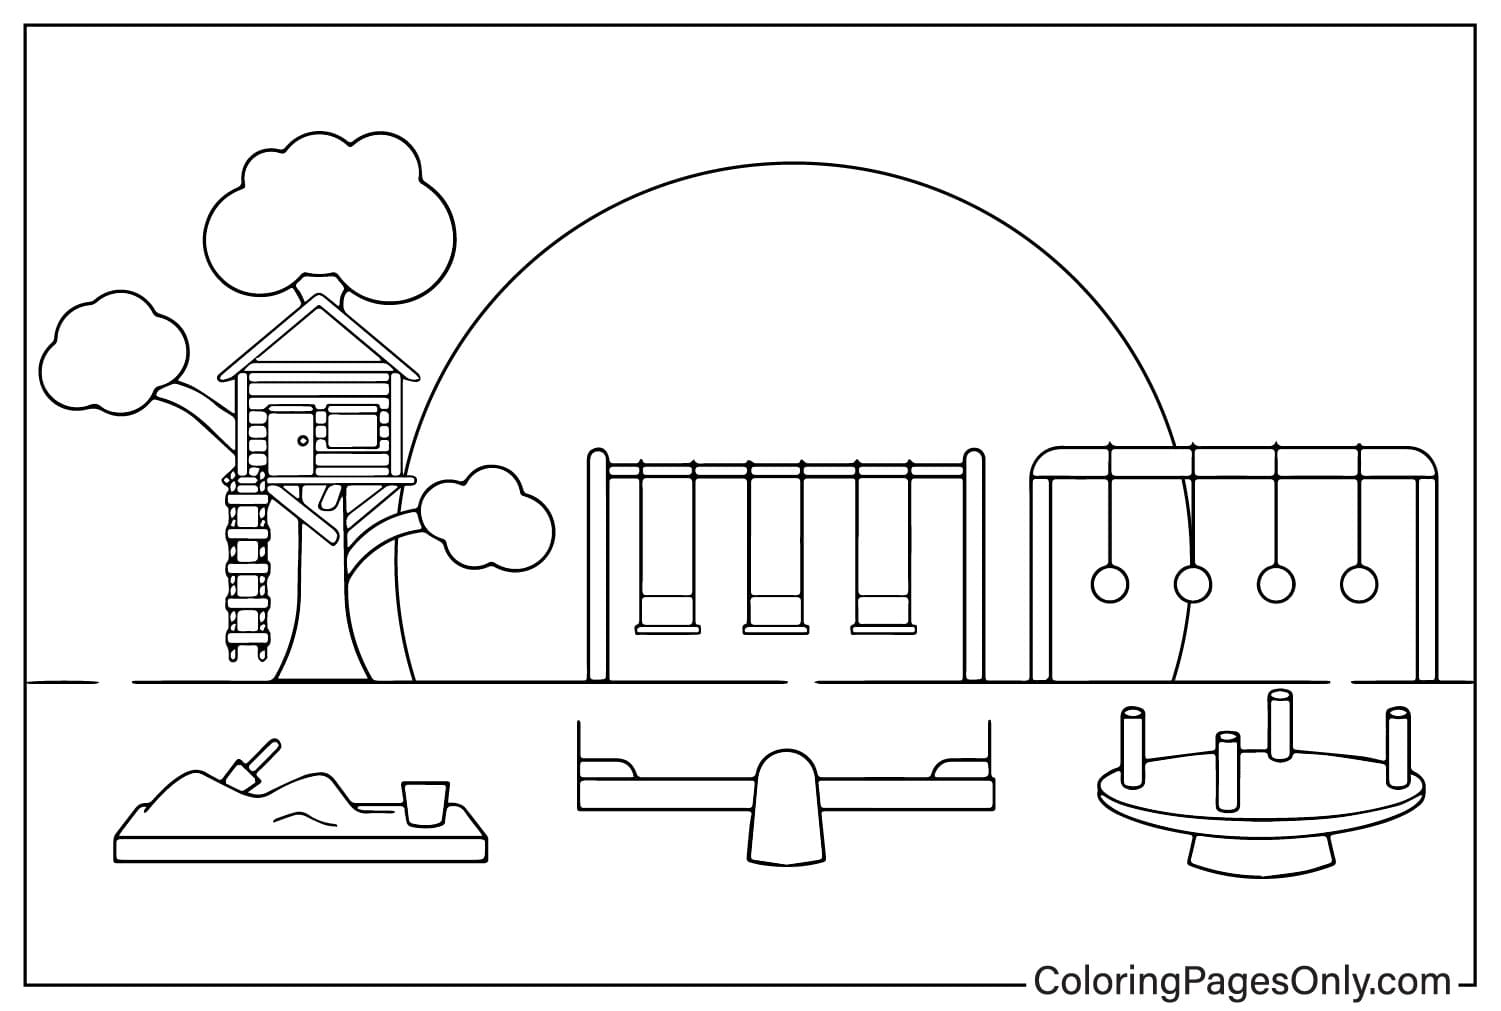 Playground Coloring Sheet from Playground